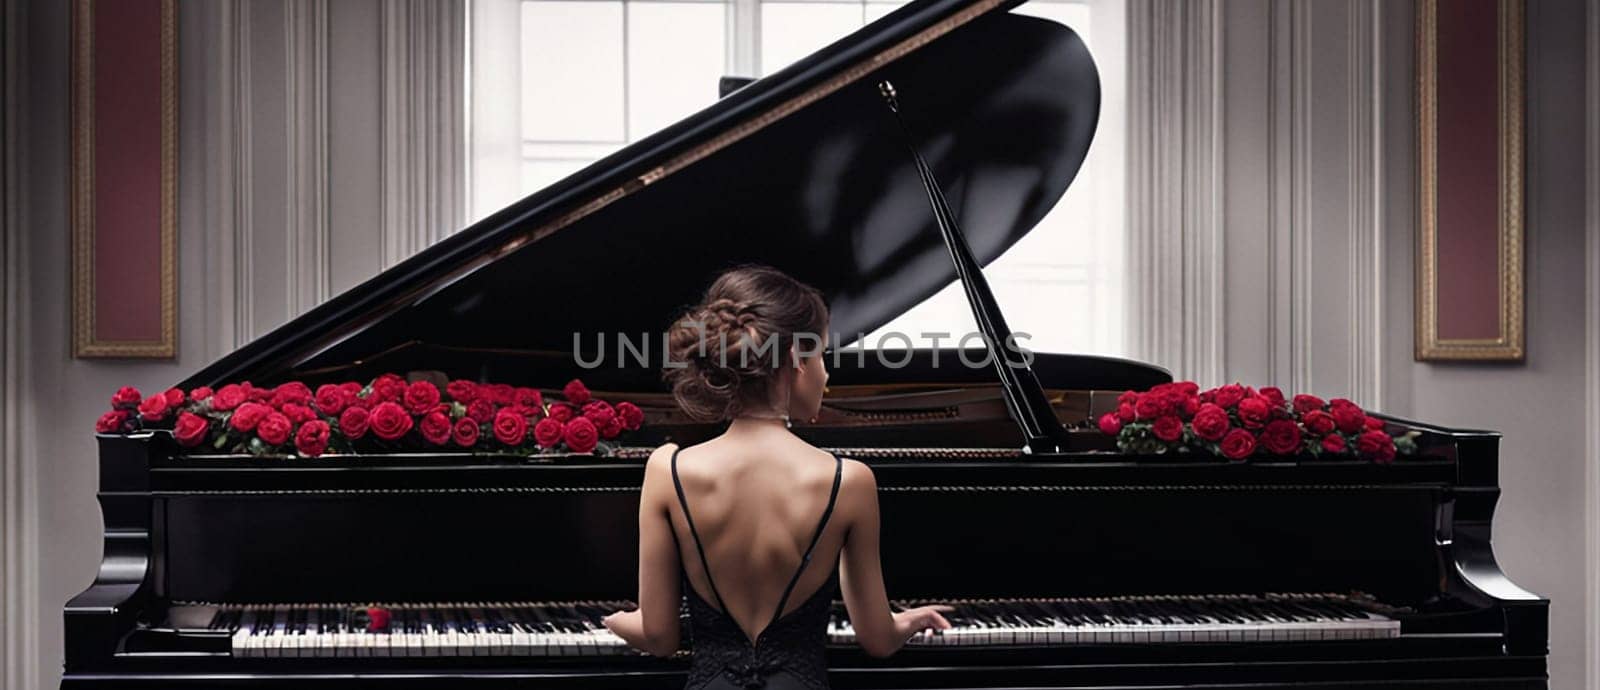 A beautiful girl plays the piano surrounded by roses by NeuroSky